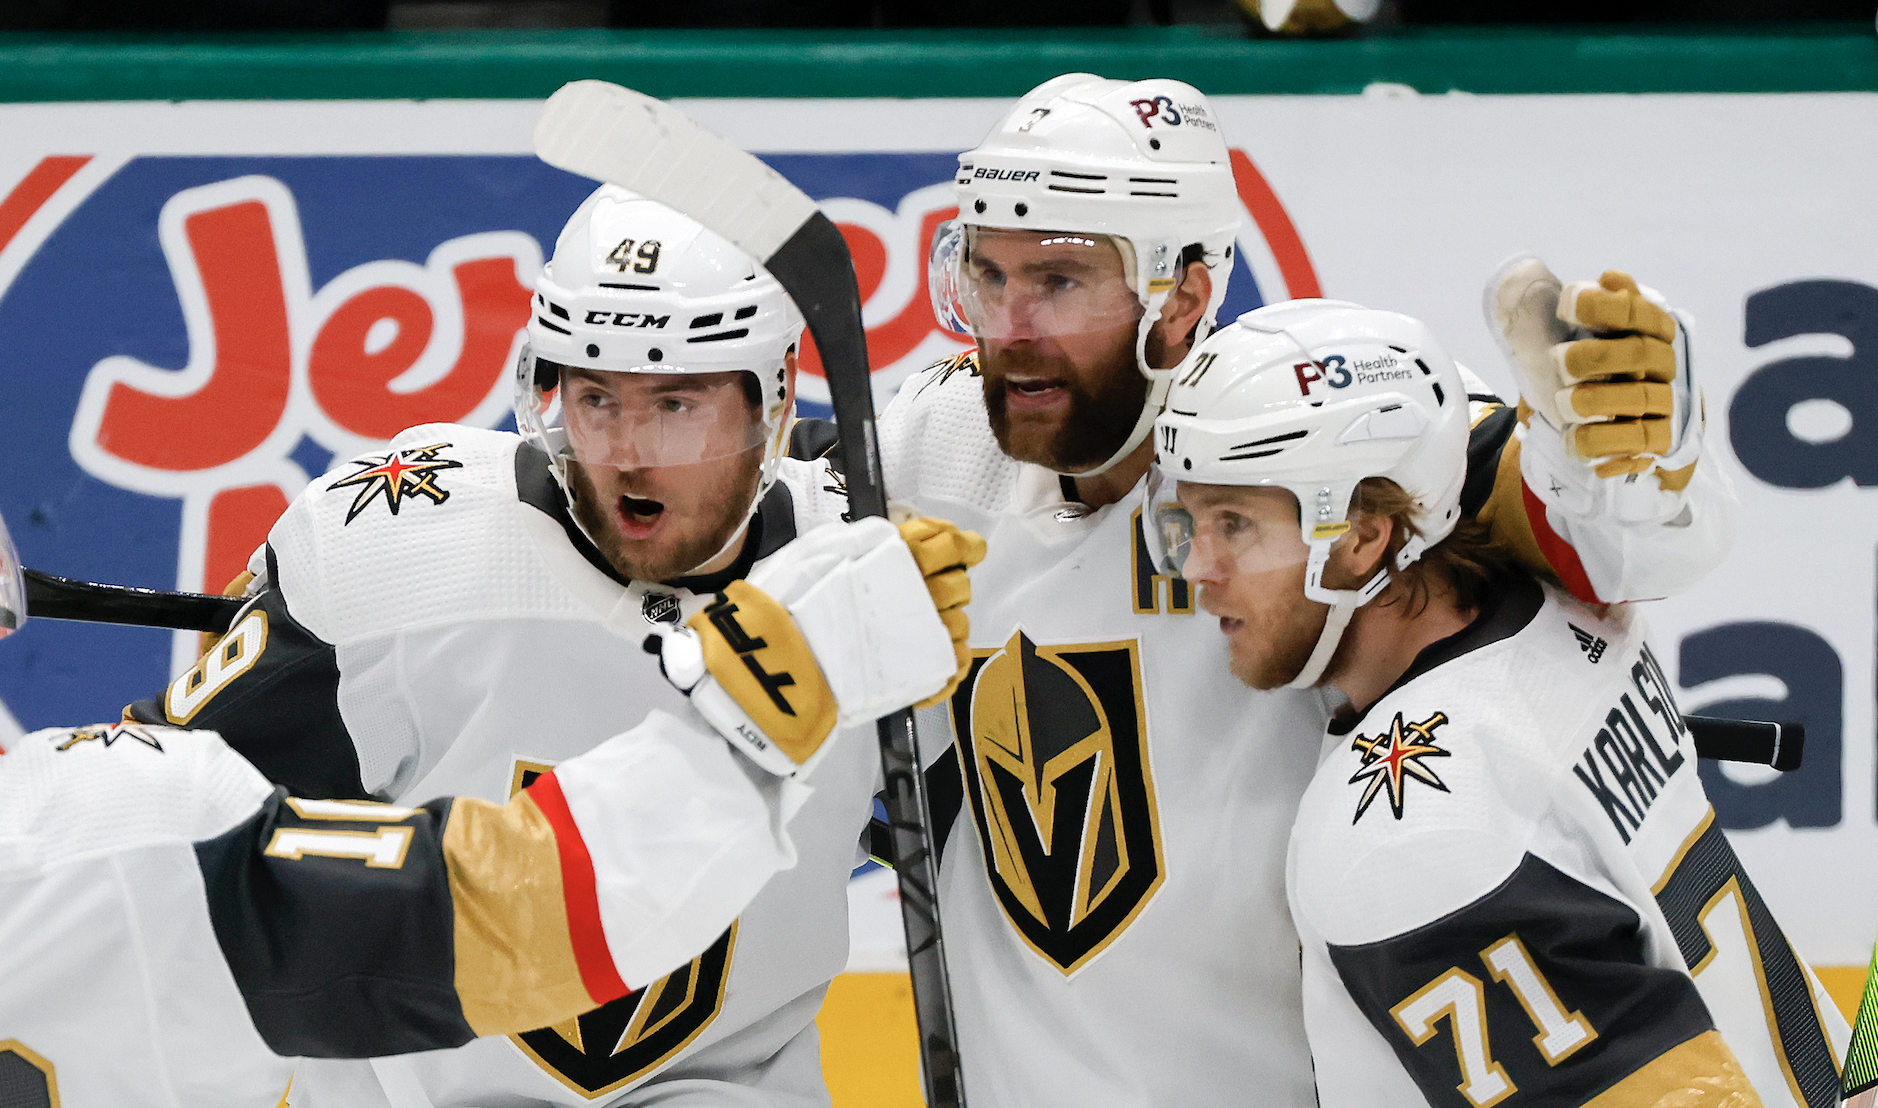 Panthers vs Golden Knights live stream how to watch 2023 NHL Stanley Cup Finals, Game 1 TechRadar